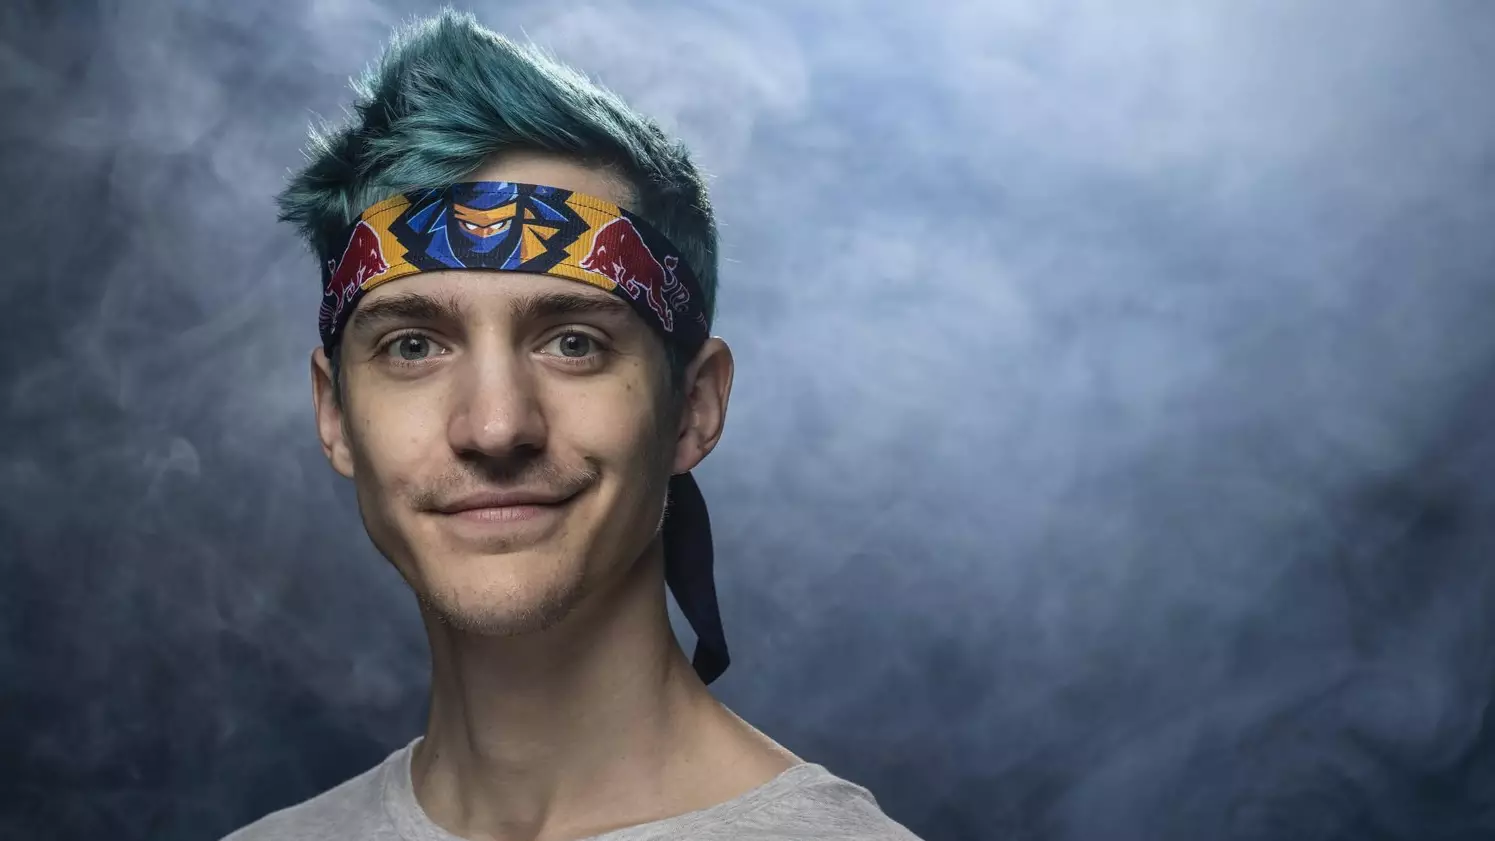 Ninja is turning his camera off when he eats to help Muslims who are fasting